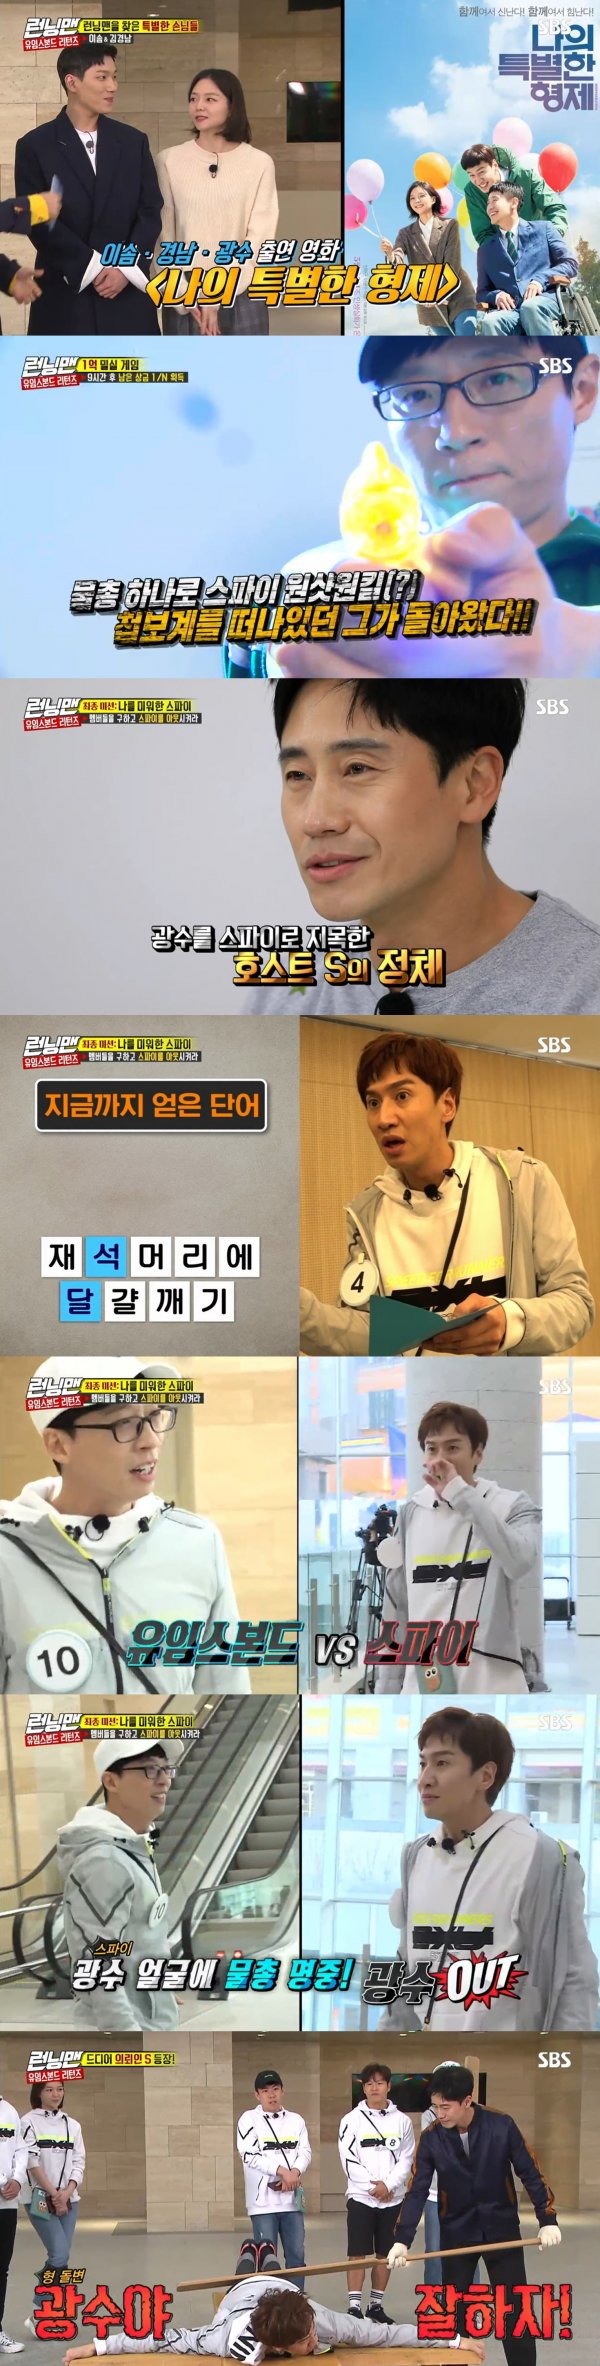 SBSs Running Man has announced its official position on the controversy over plagiarism of Navers popular webtoon Money Game.Running Man said on the 29th, The production team is also a fan of Money Game, and the concept of Webtoon is well suited to Running Man.However, I apologize for the failure to ask for understanding with Naver Webtoon, which is serving the Money Game writer Bae Jin-soo and Webtoon in advance. I apologize for the lack of production team. The production team has agreed to contact both sides to deliver their apology, but we still need to discuss additional issues, including legal action.Were talking to each other so that it can be resolved smoothly, he said.On the special Money Race episode of Running Man, which aired on the 28th, the Game was held where members lasted nine hours in each container and One the remaining prize money by one-ninth.The problem here is how the Game is played: The production team of Running Man borrowed the Webtoon Money Game to play the Game.In the end, netizens and fans of the Webtoon Money Game raised suspicions of similarities immediately after the broadcast, and the writers of Money Game Bae Jin-soo and Naver Webtoon also expressed displeasure and controversy is growing.In this situation, it was confirmed that Running Man conducted a special feature without seeking prior consent or understanding, and eventually the production team of Running Man faced a situation where they had to take legal responsibility for the case.